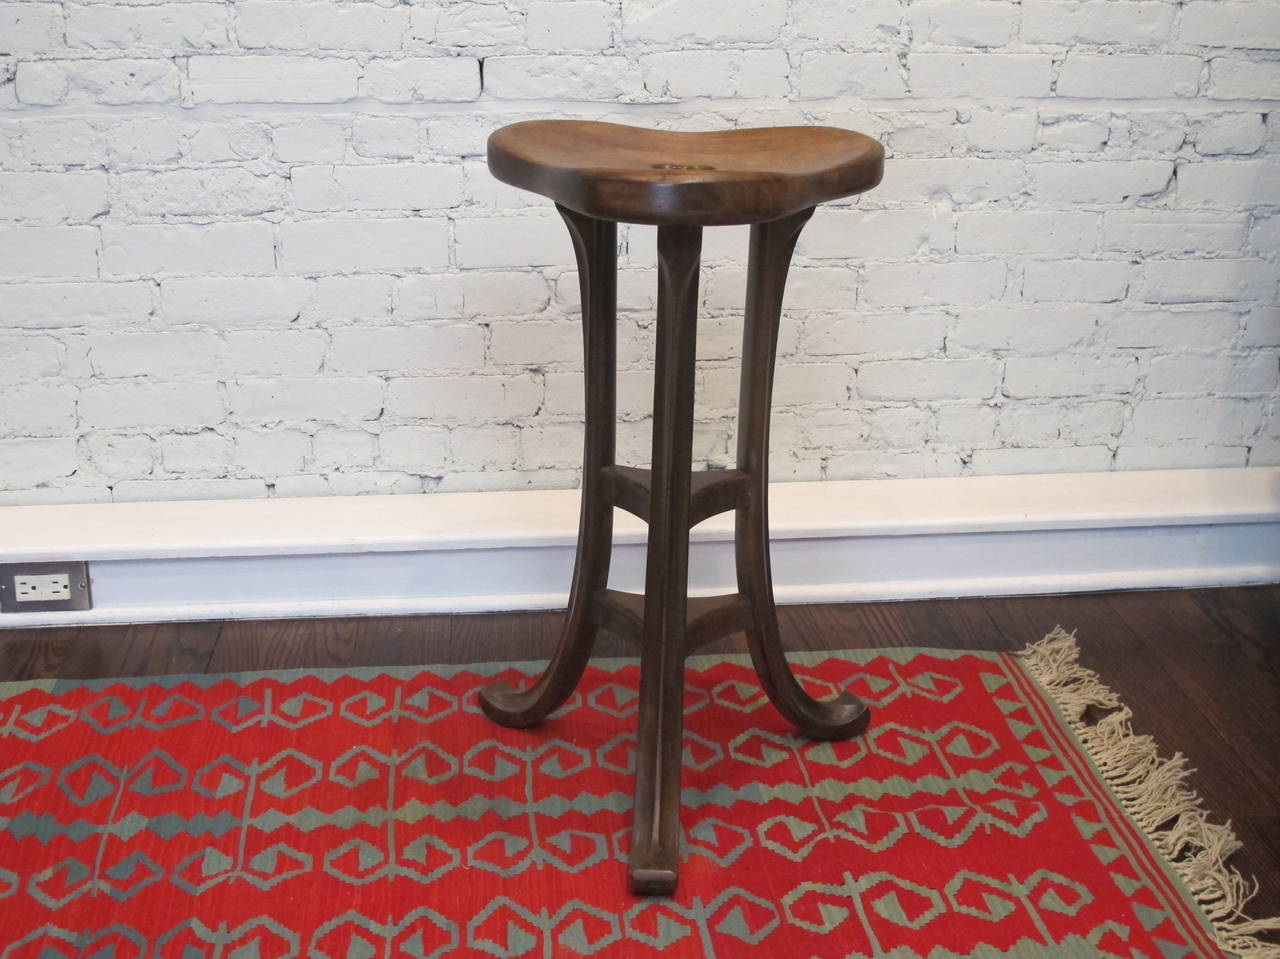 English mahogany stool with trefoil design including cut-out handle in top. Refinished at some point, with a pleasant patina from use. Very sturdy.